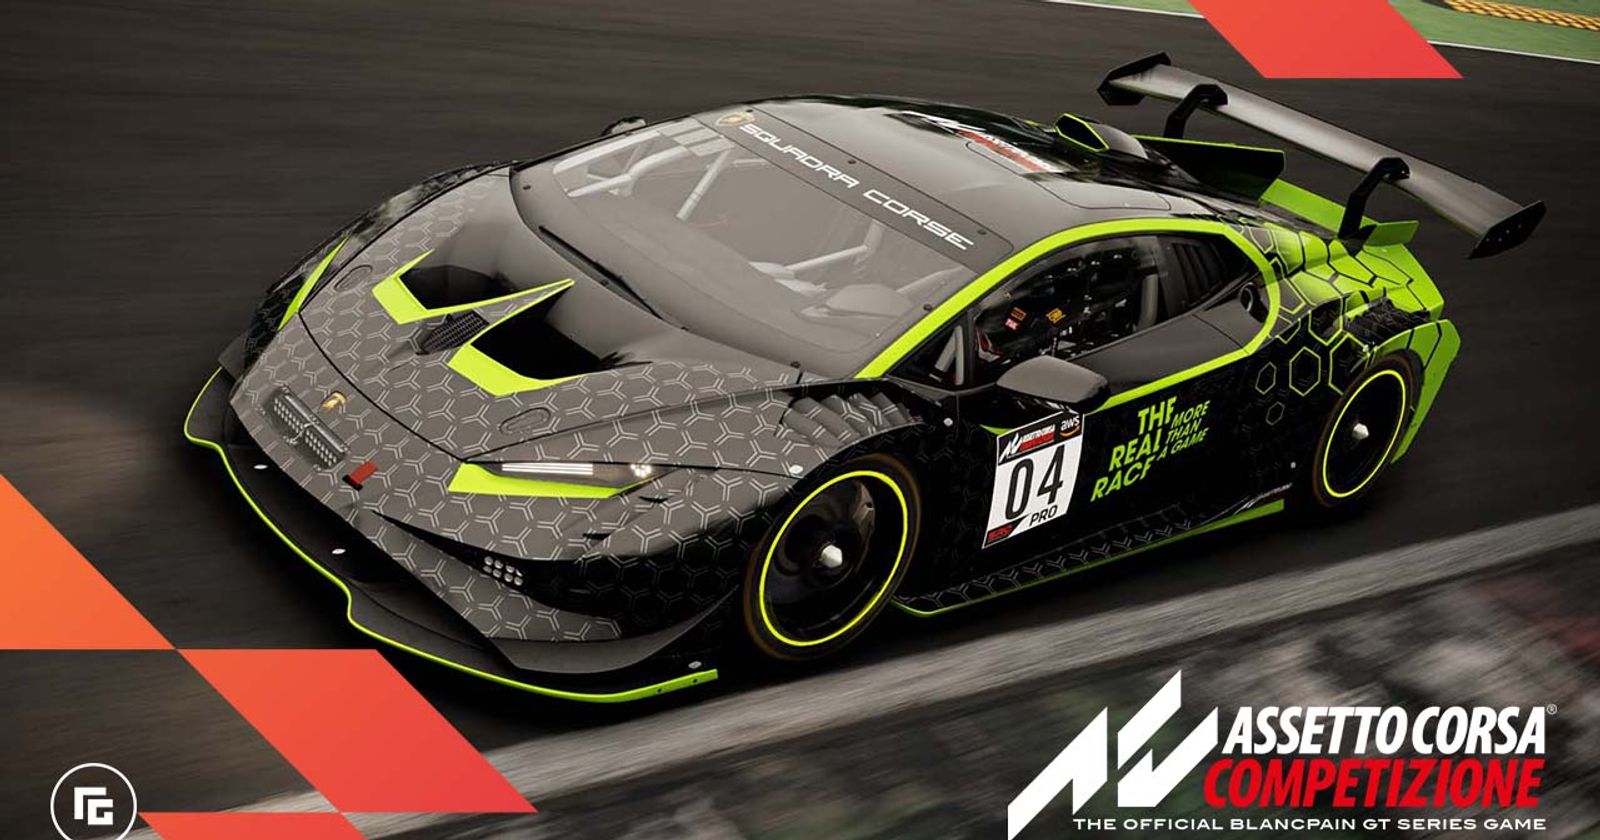 Assetto Corsa Competizione free to play on Steam for a limited time